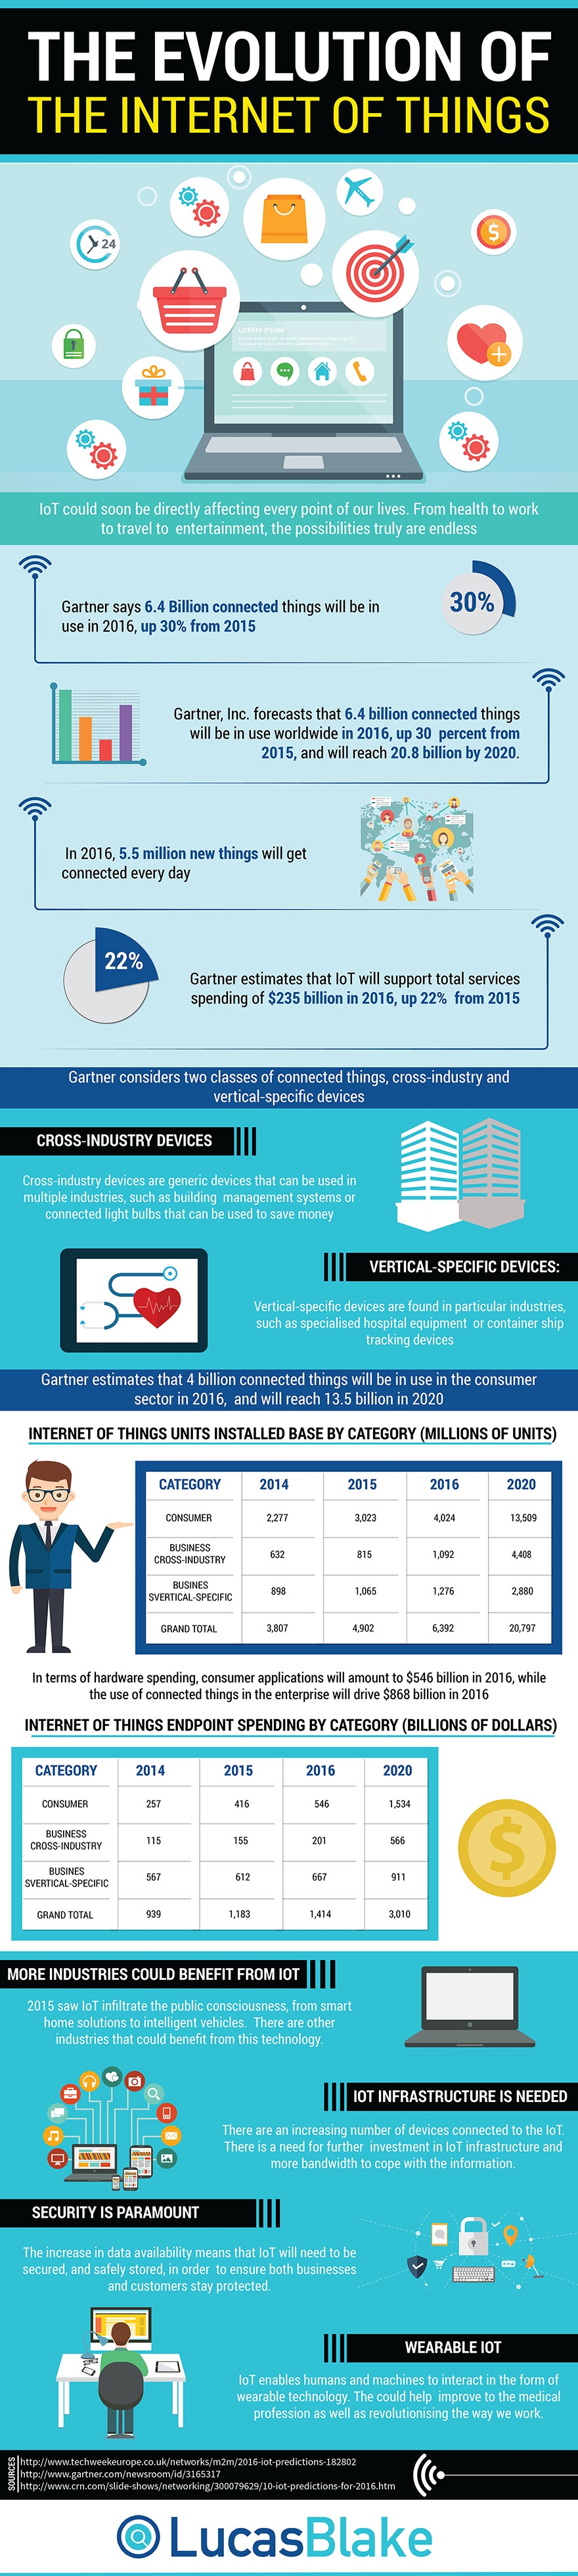 b2b-marketing-infographic-of-the-week-_-internet-of-things-iot